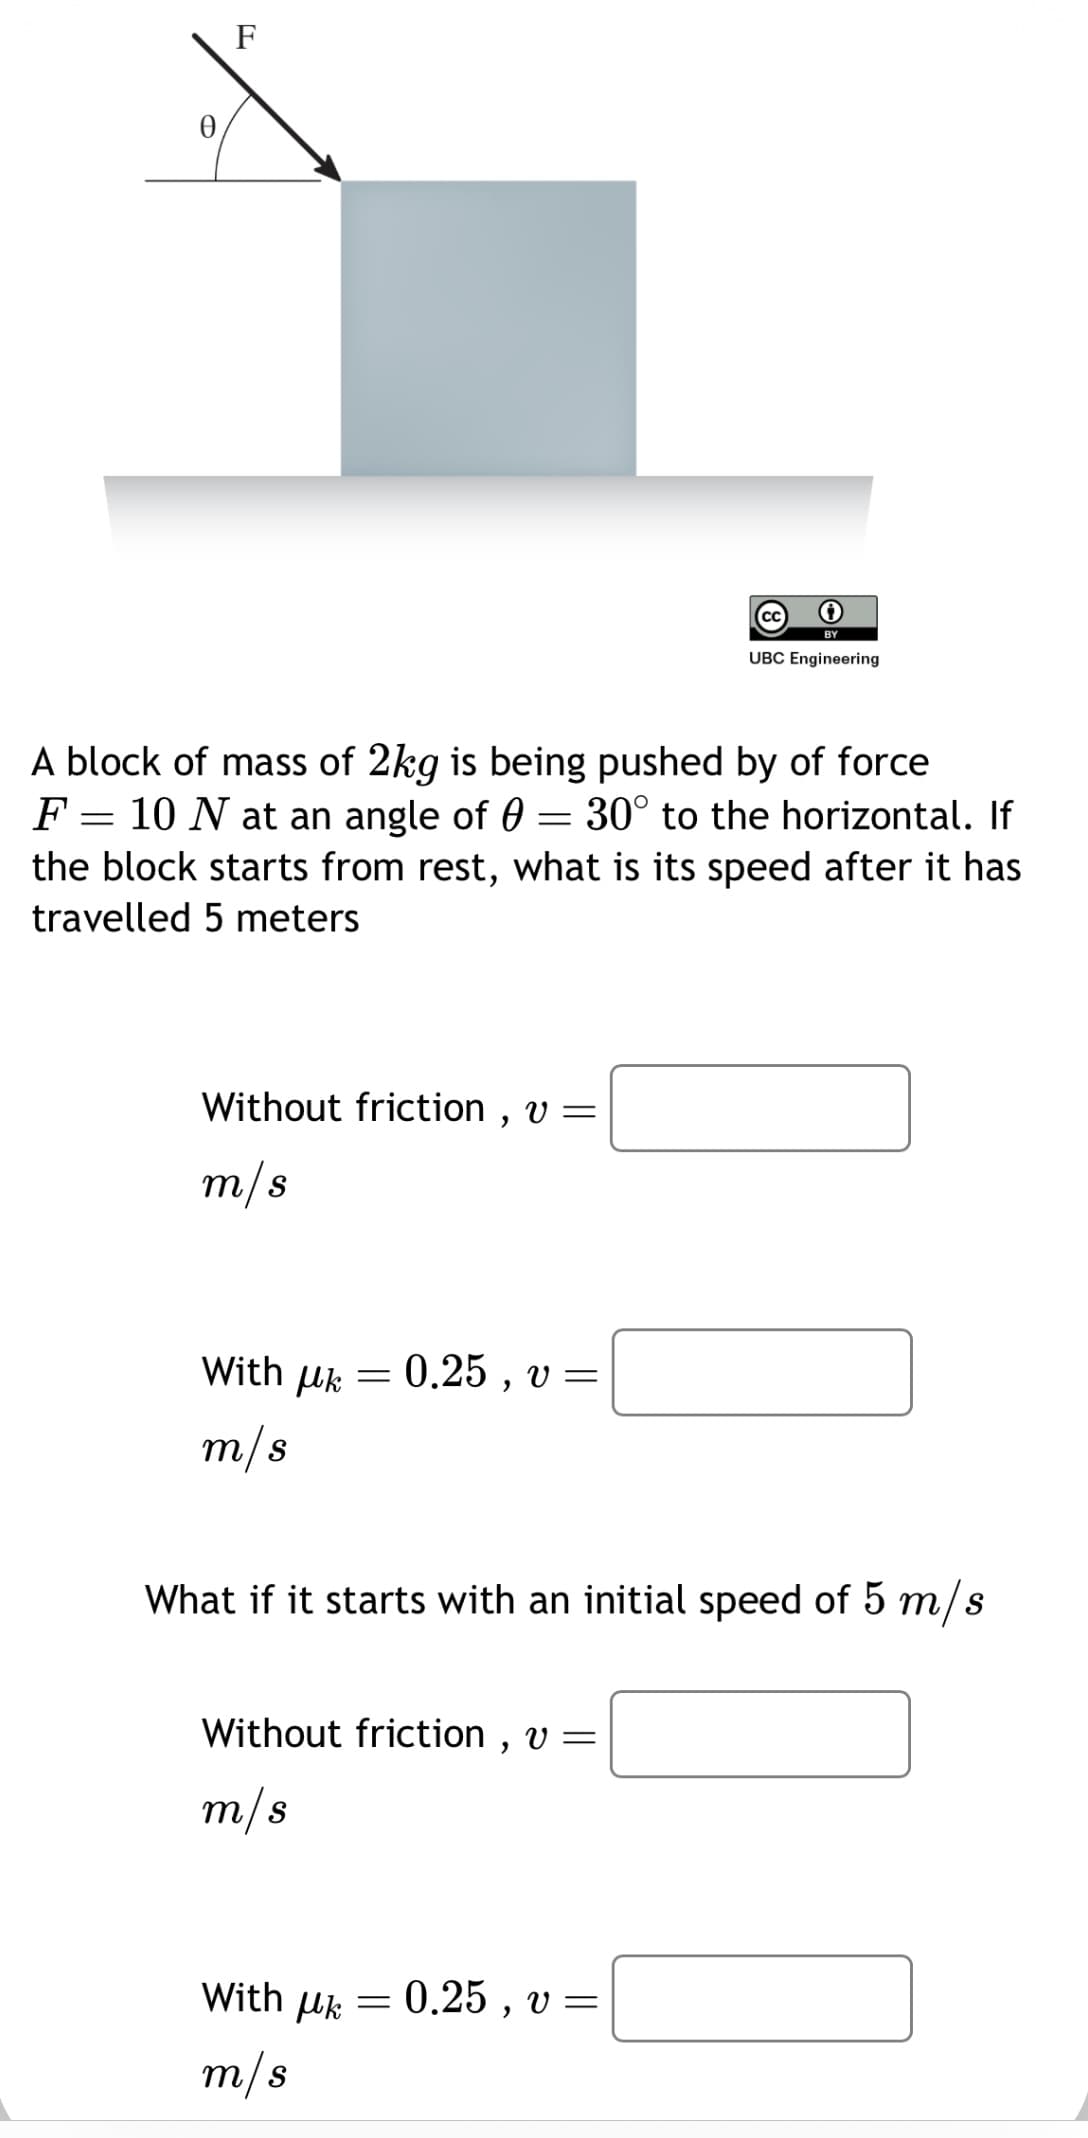 F
A block of mass of 2kg is being pushed by of force
F = 10 N at an angle of 0 = 30° to the horizontal. If
the block starts from rest, what is its speed after it has
travelled 5 meters
Without friction, v =
m/s
With μk
m/s
-
With Uk
m/s
0.25, v=
What if it starts with an initial speed of 5 m/s
Without friction, v =
m/s
=
BY
UBC Engineering
0.25, v=